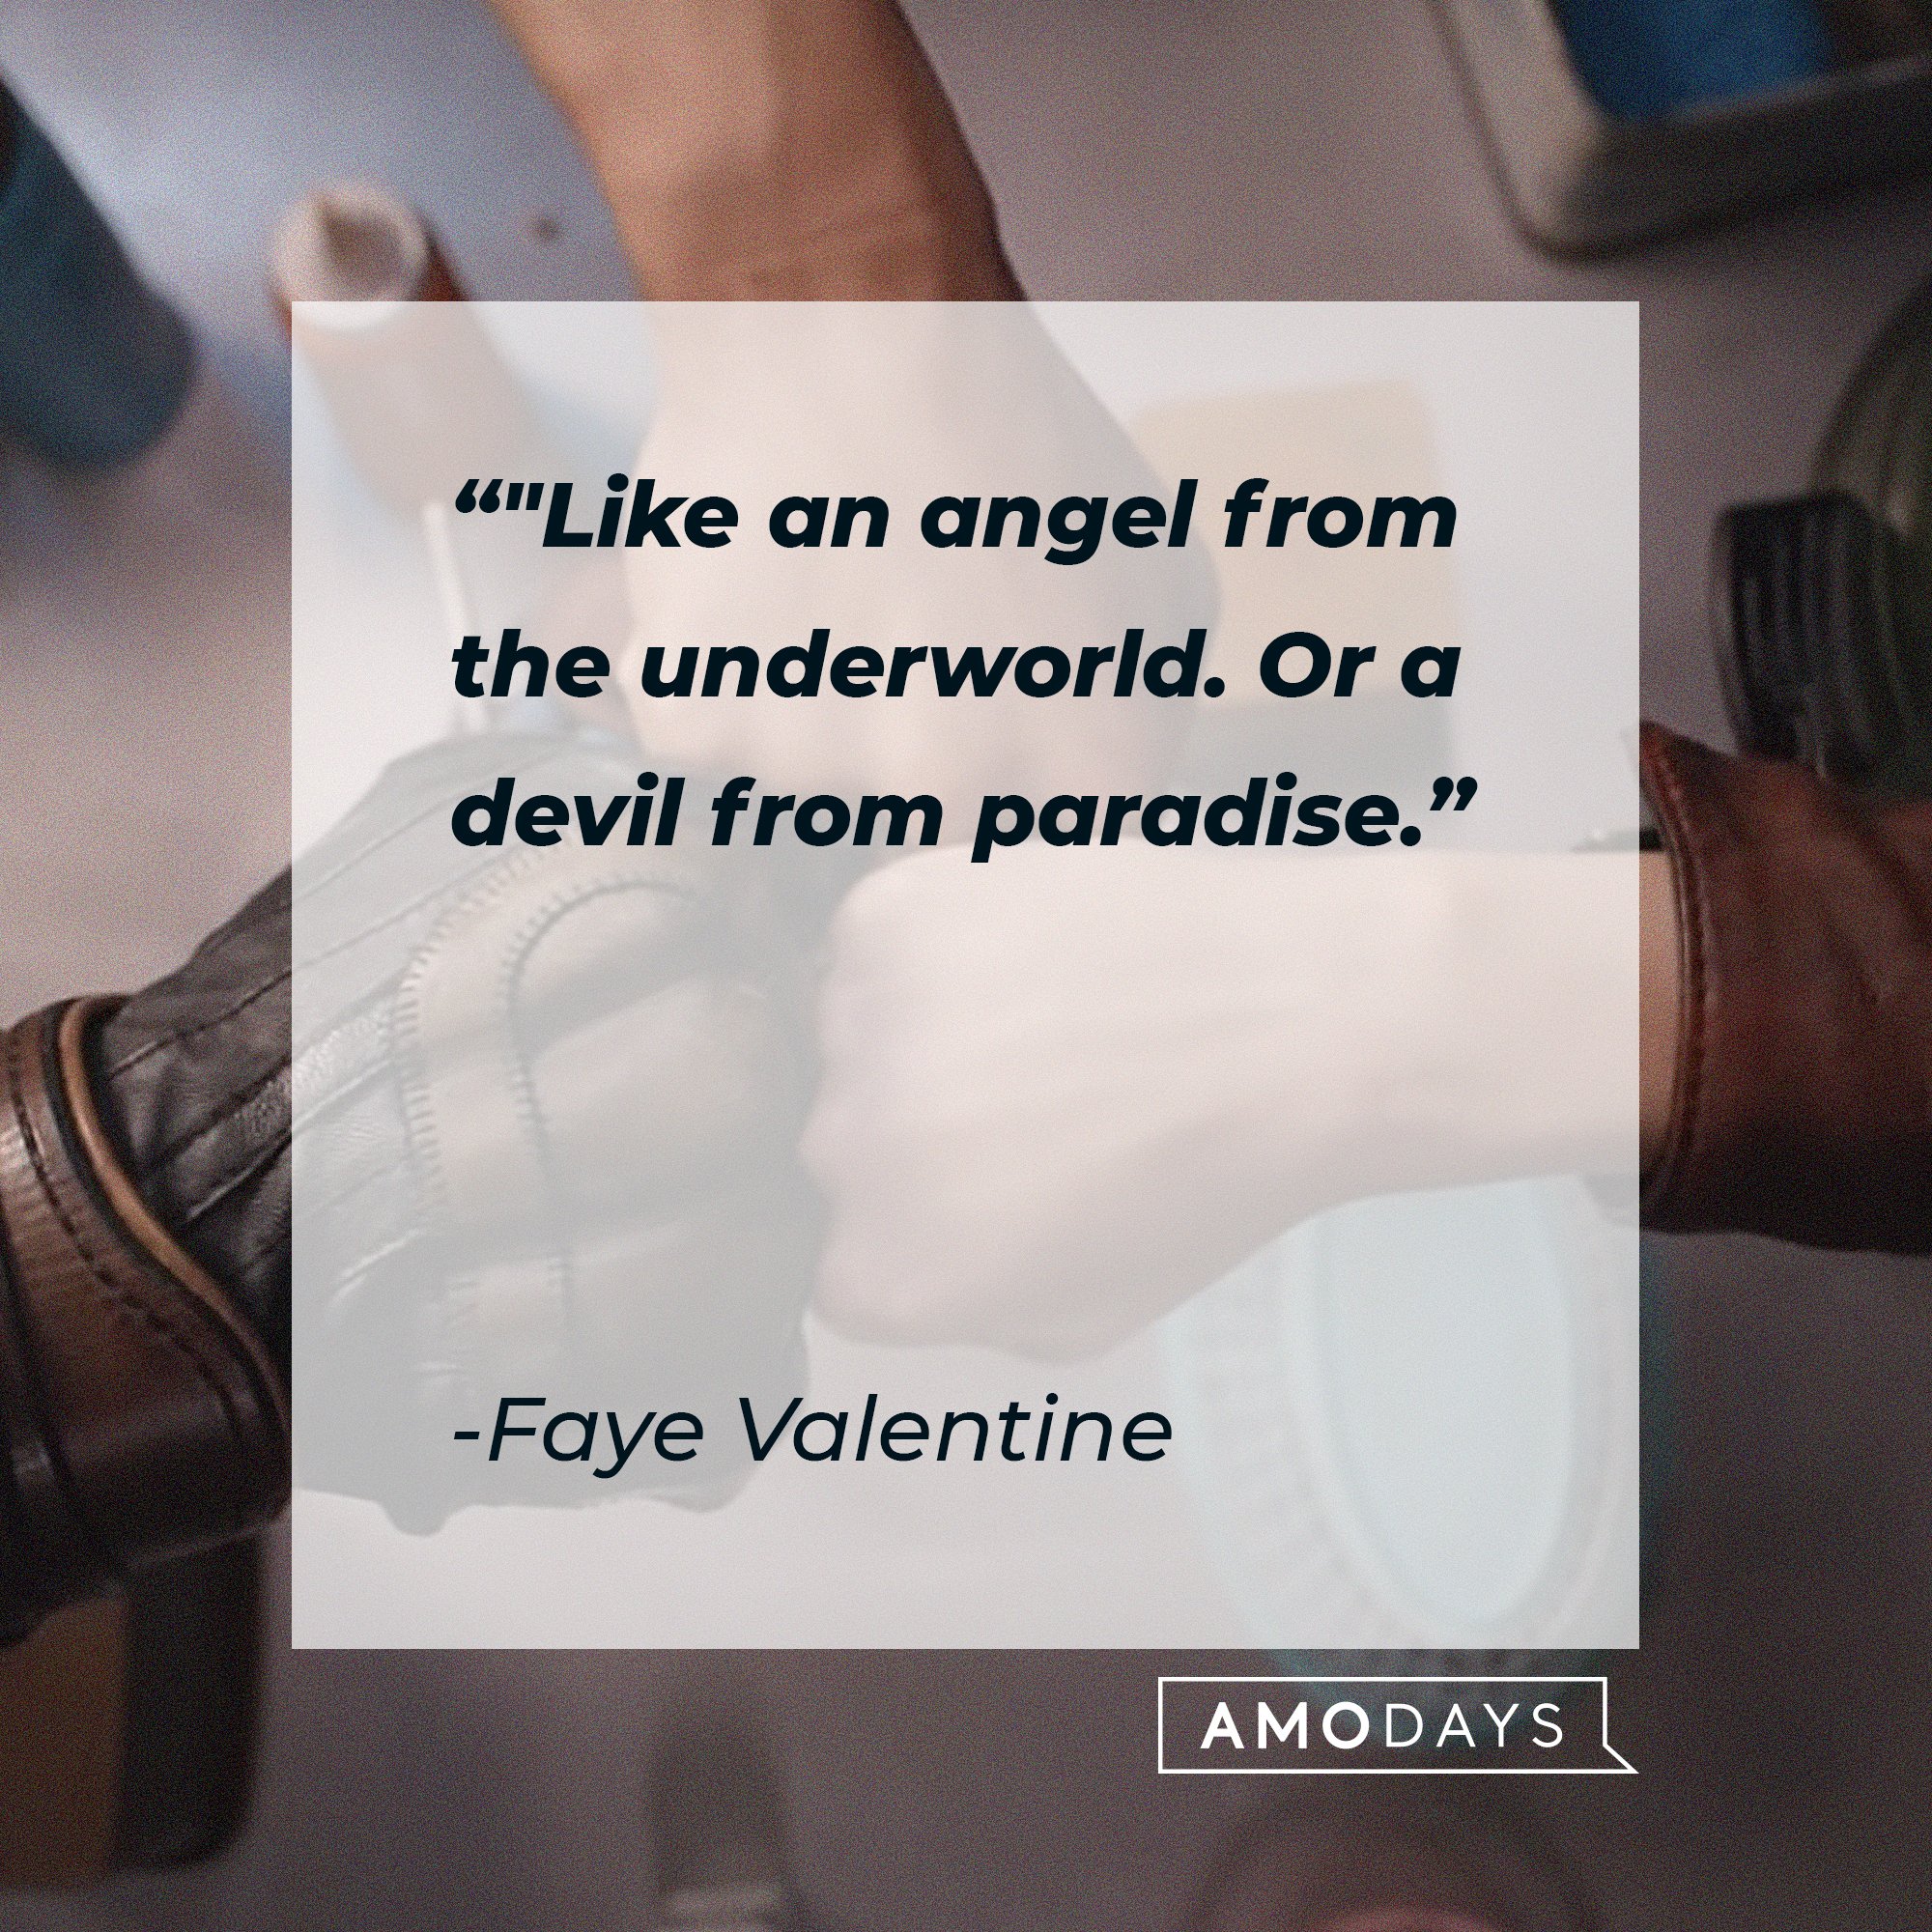 Faye Valentine's quote: "Like an angel from the underworld. Or a devil from paradise.” | Image: AmoDays